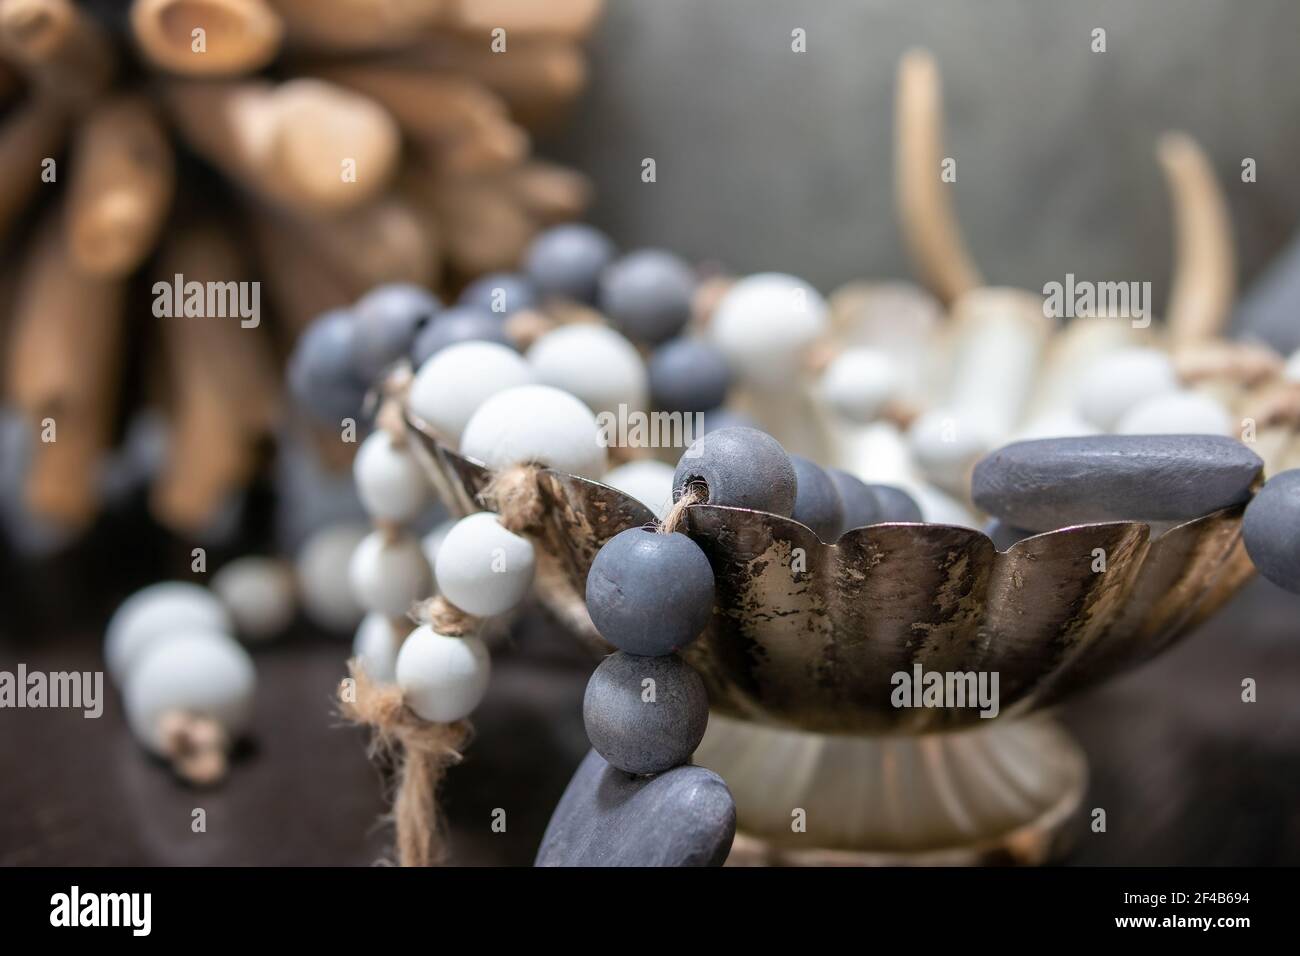 Wood pearls decoration on table, close up. Blue and white pearls draped over dish. Soft muted brown, green and blue colors. Decoration backdrop. Selec Stock Photo